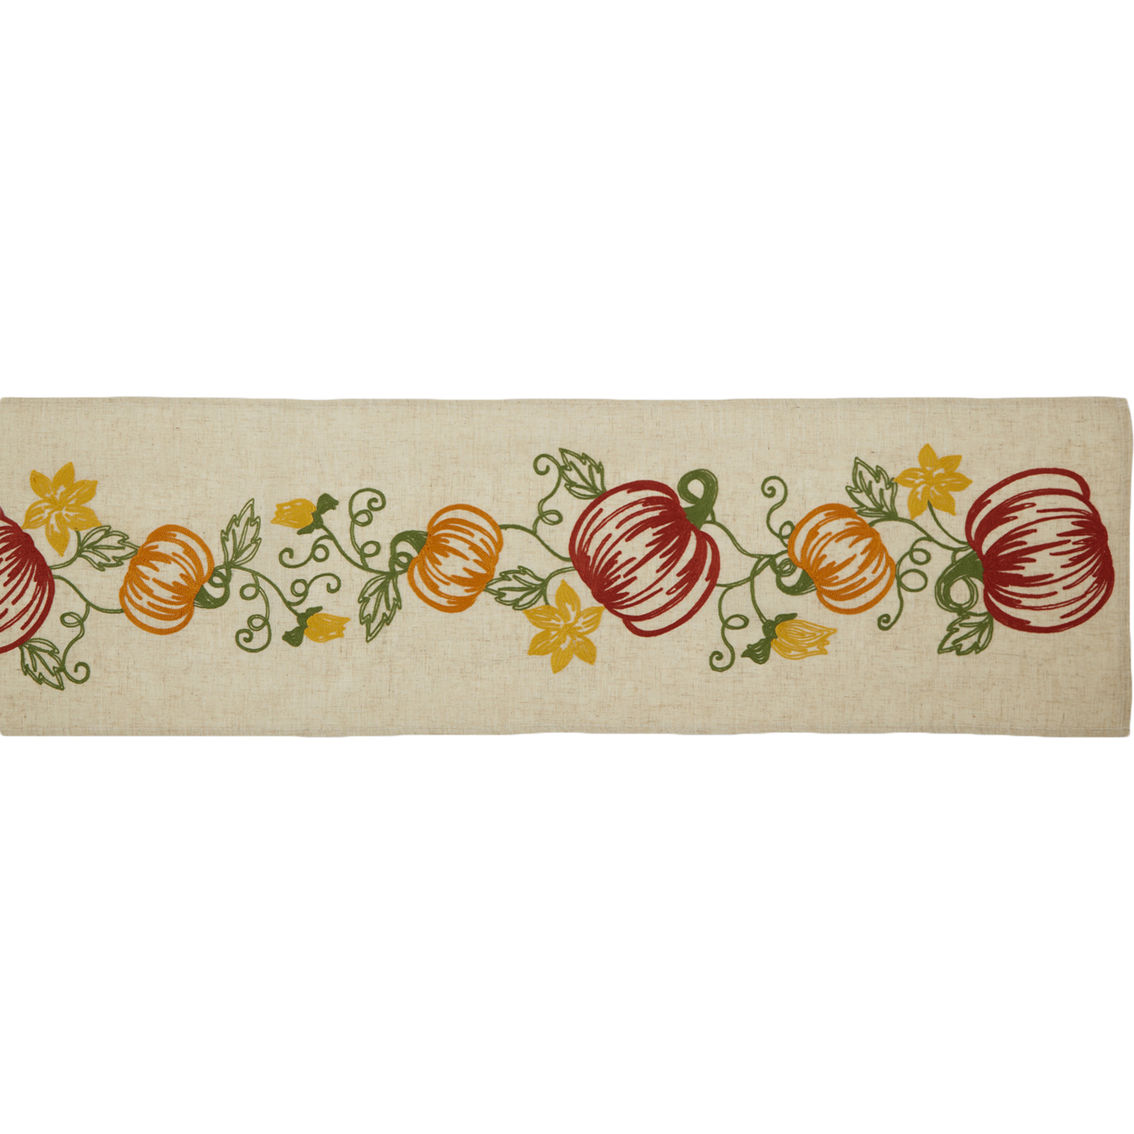 Design Imports 14 x 70 in. Pumpkin Vine Embroidered Table Runner - Image 3 of 8